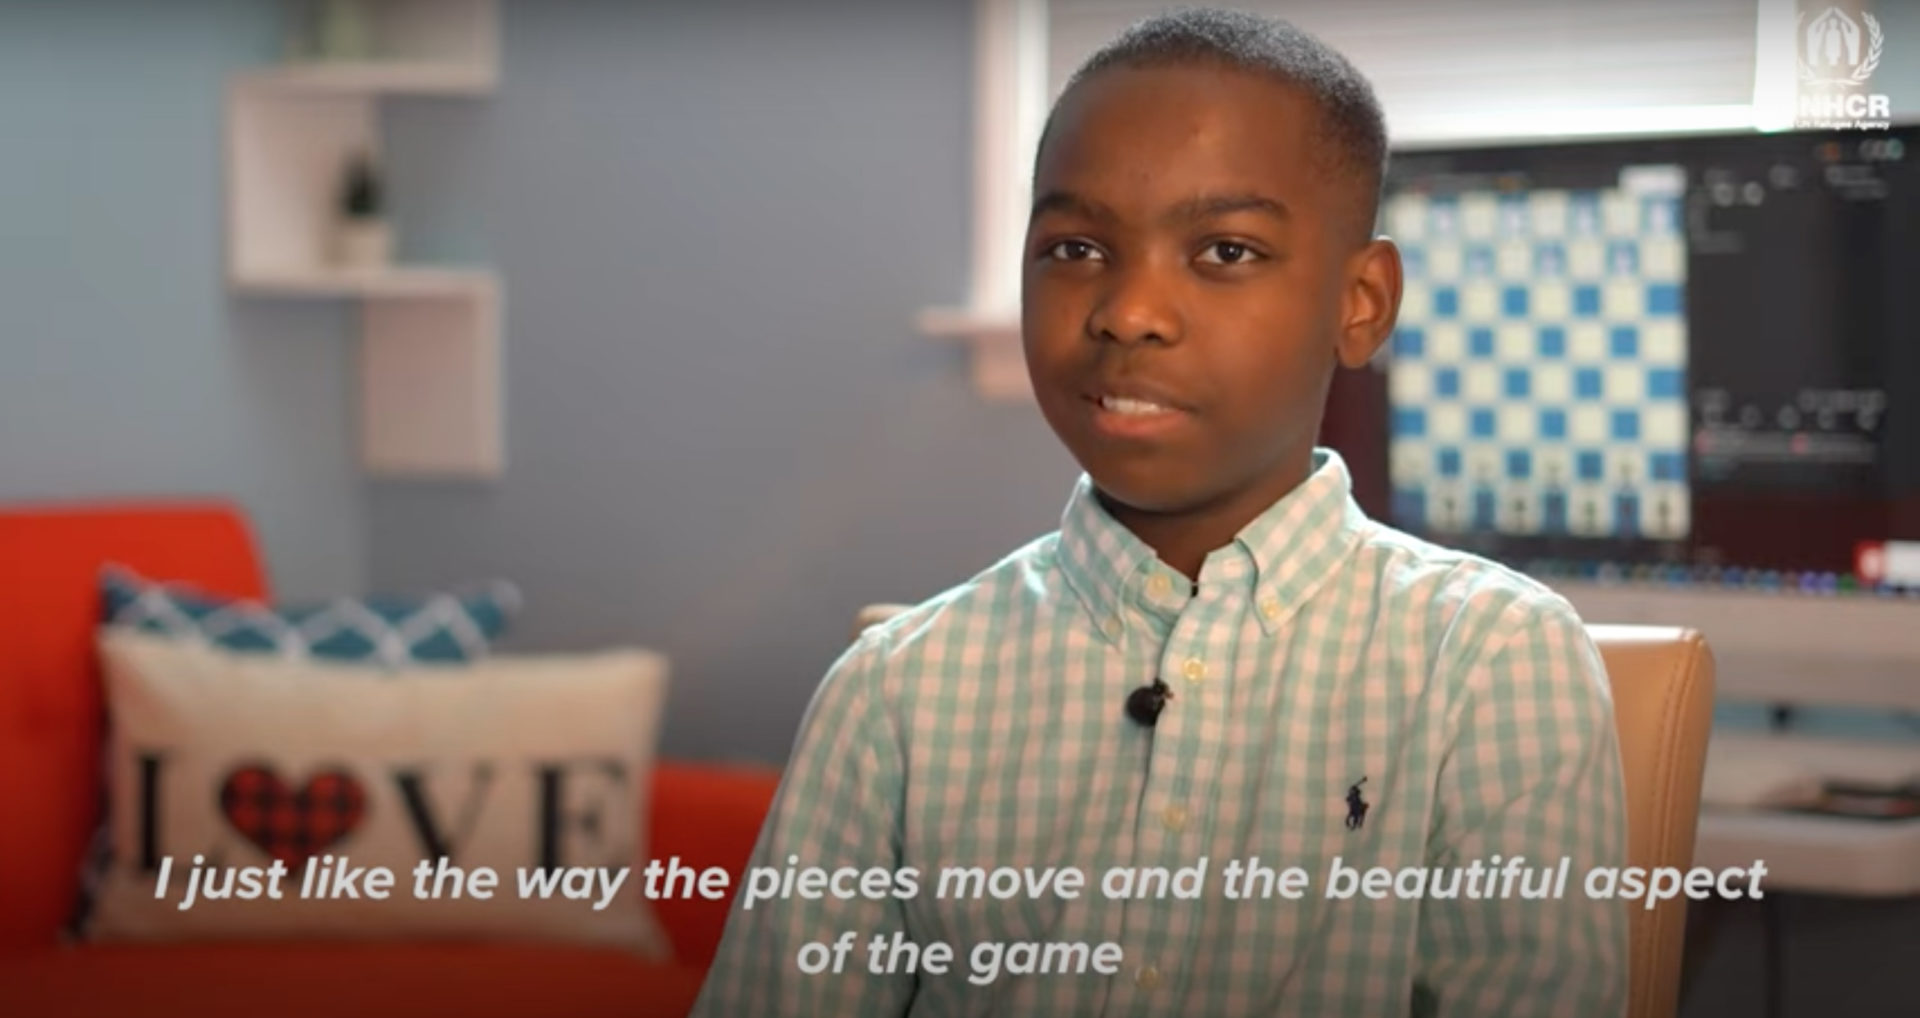 Meet Tani Adewumi, 12-year-old refugee and chess prodigy